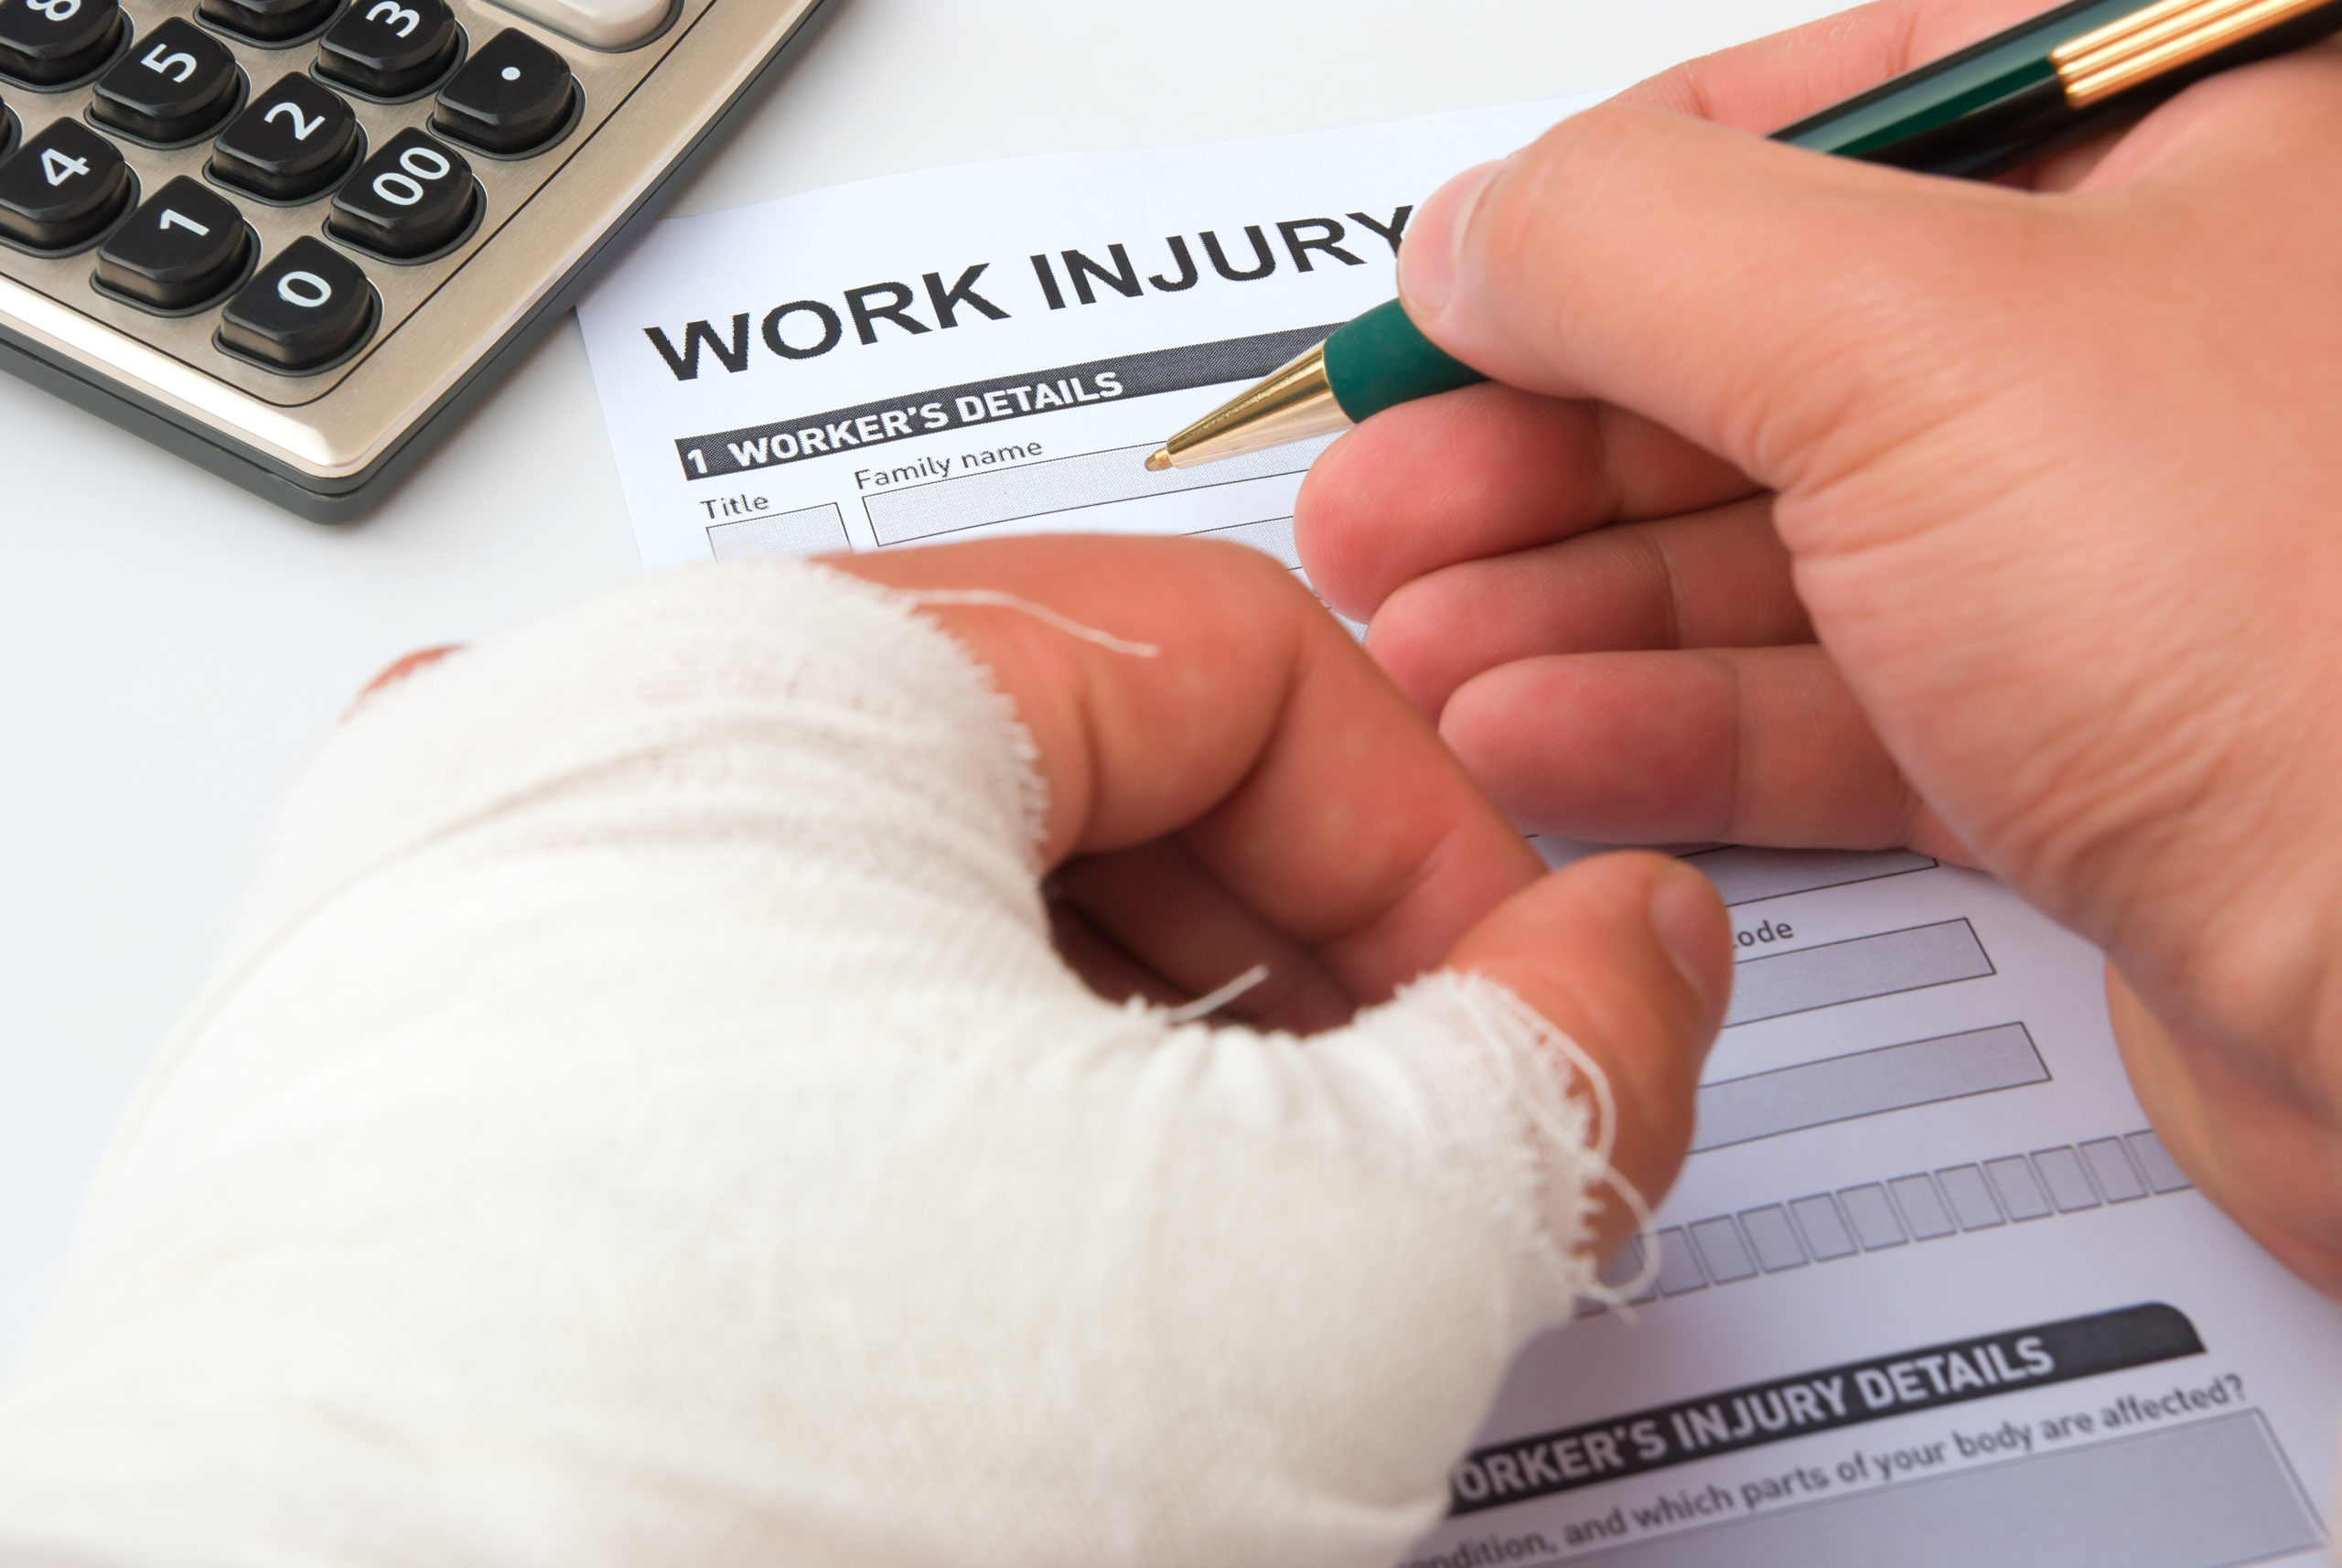 Injured worker deciding to file workers' comp vs personal injury claim